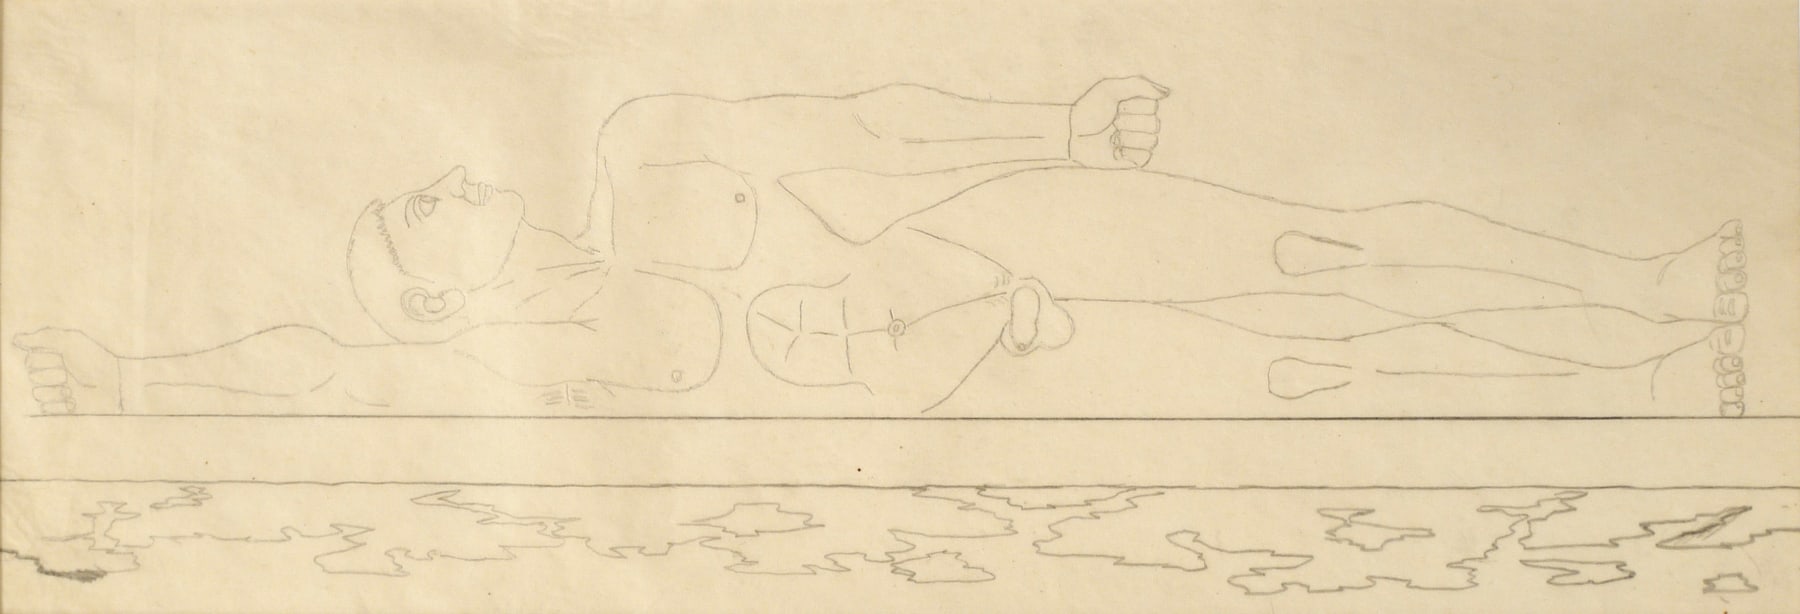 Study for the Sea, 1946, Pencil on tracing paper